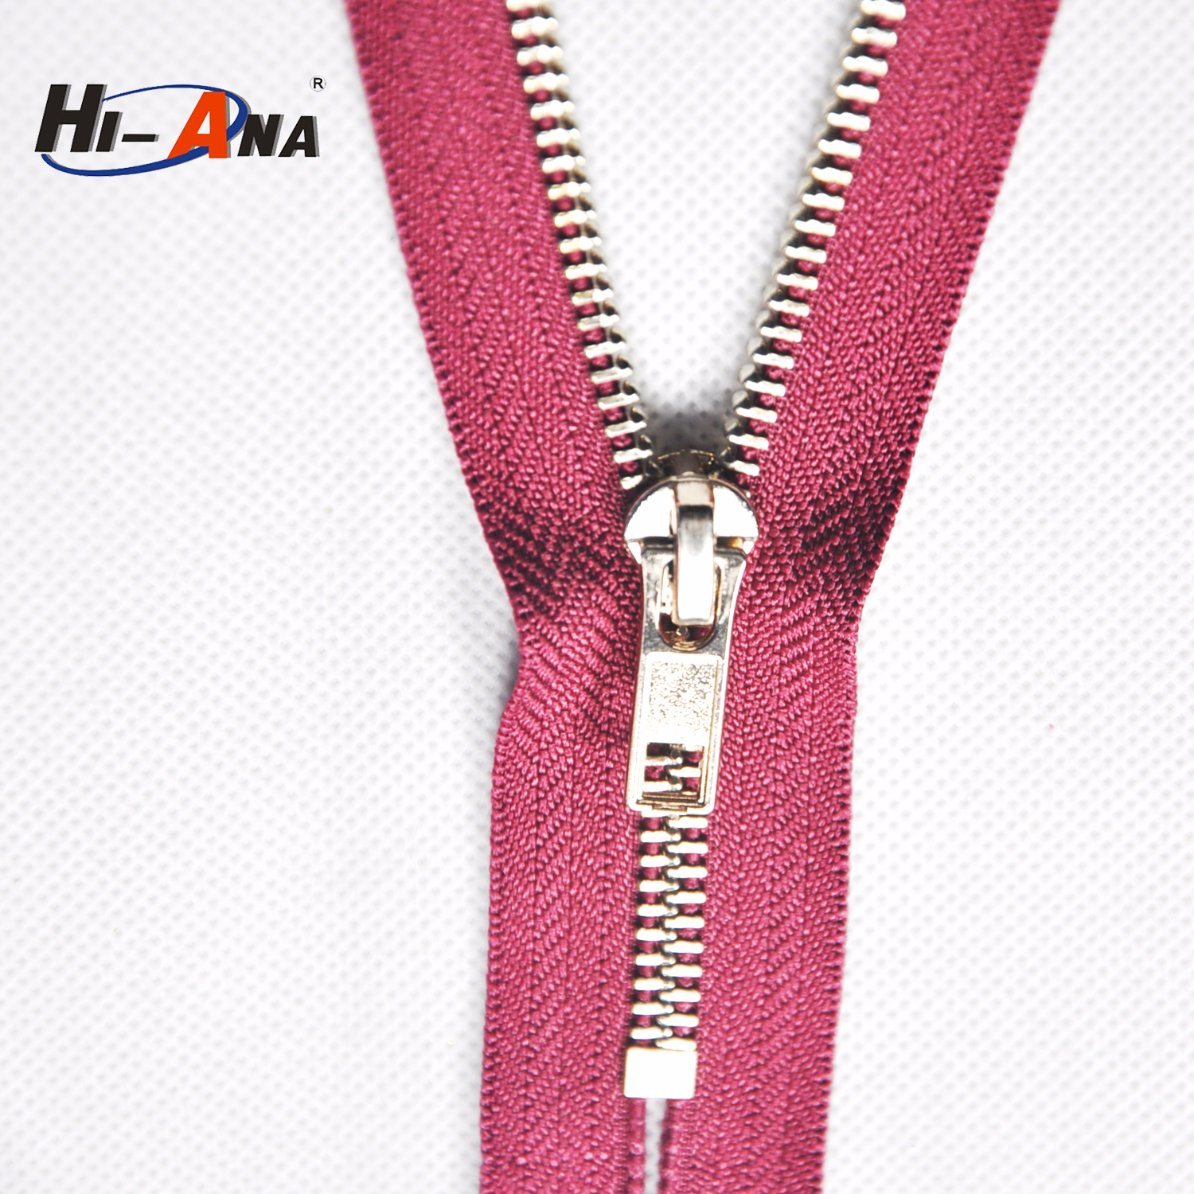 More 6 Years No Complaint Ningbo Zipper for Pants